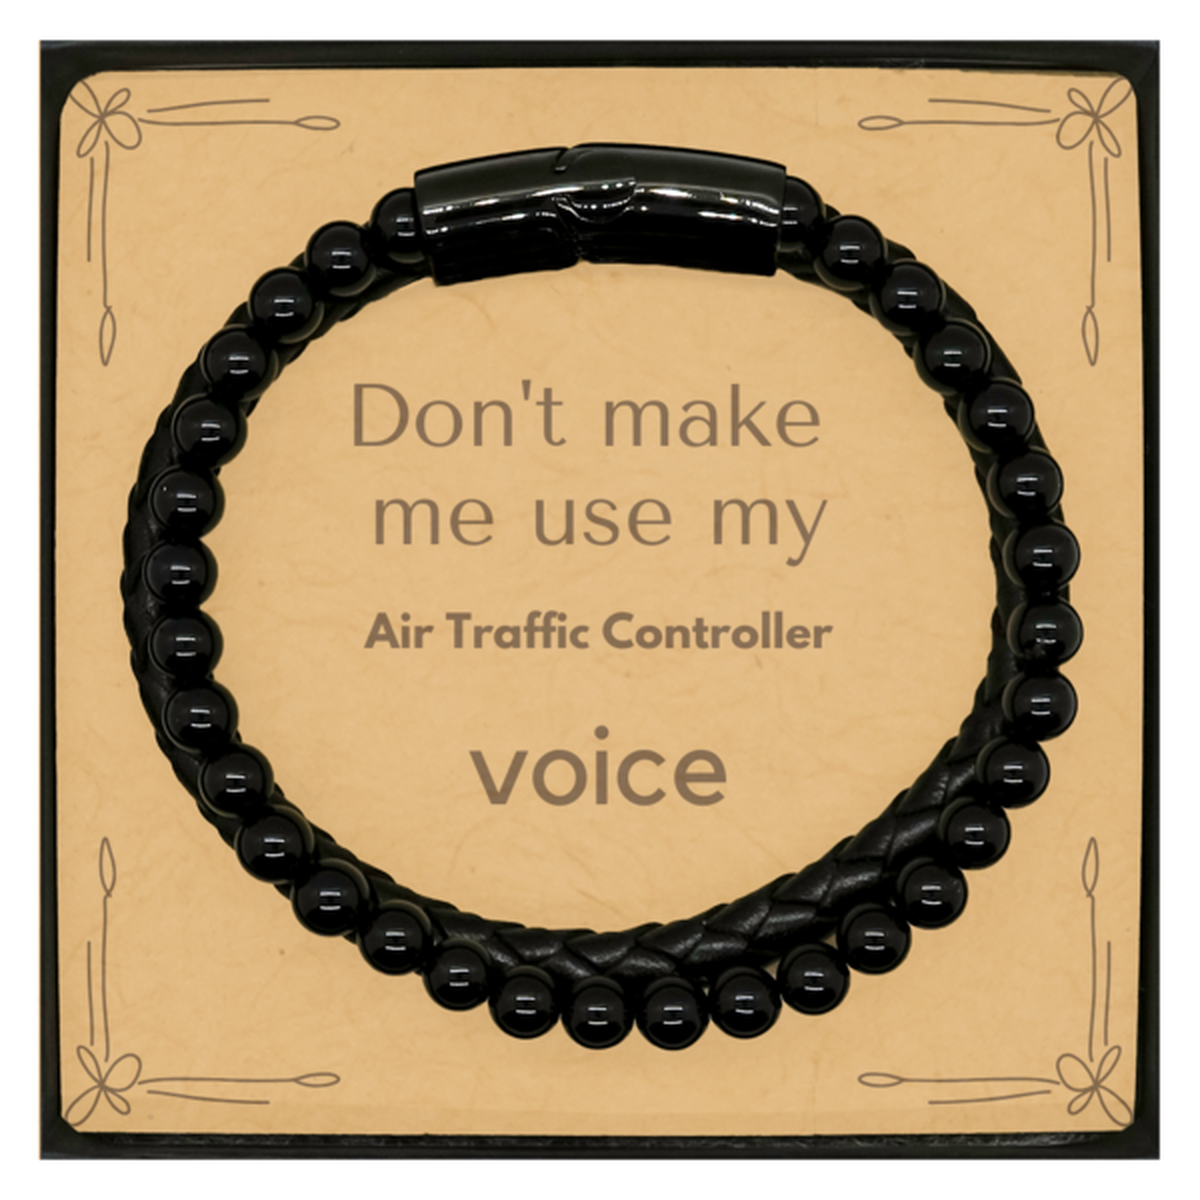 Don't make me use my Air Traffic Controller voice, Sarcasm Air Traffic Controller Card Gifts, Christmas Air Traffic Controller Stone Leather Bracelets Birthday Unique Gifts For Air Traffic Controller Coworkers, Men, Women, Colleague, Friends